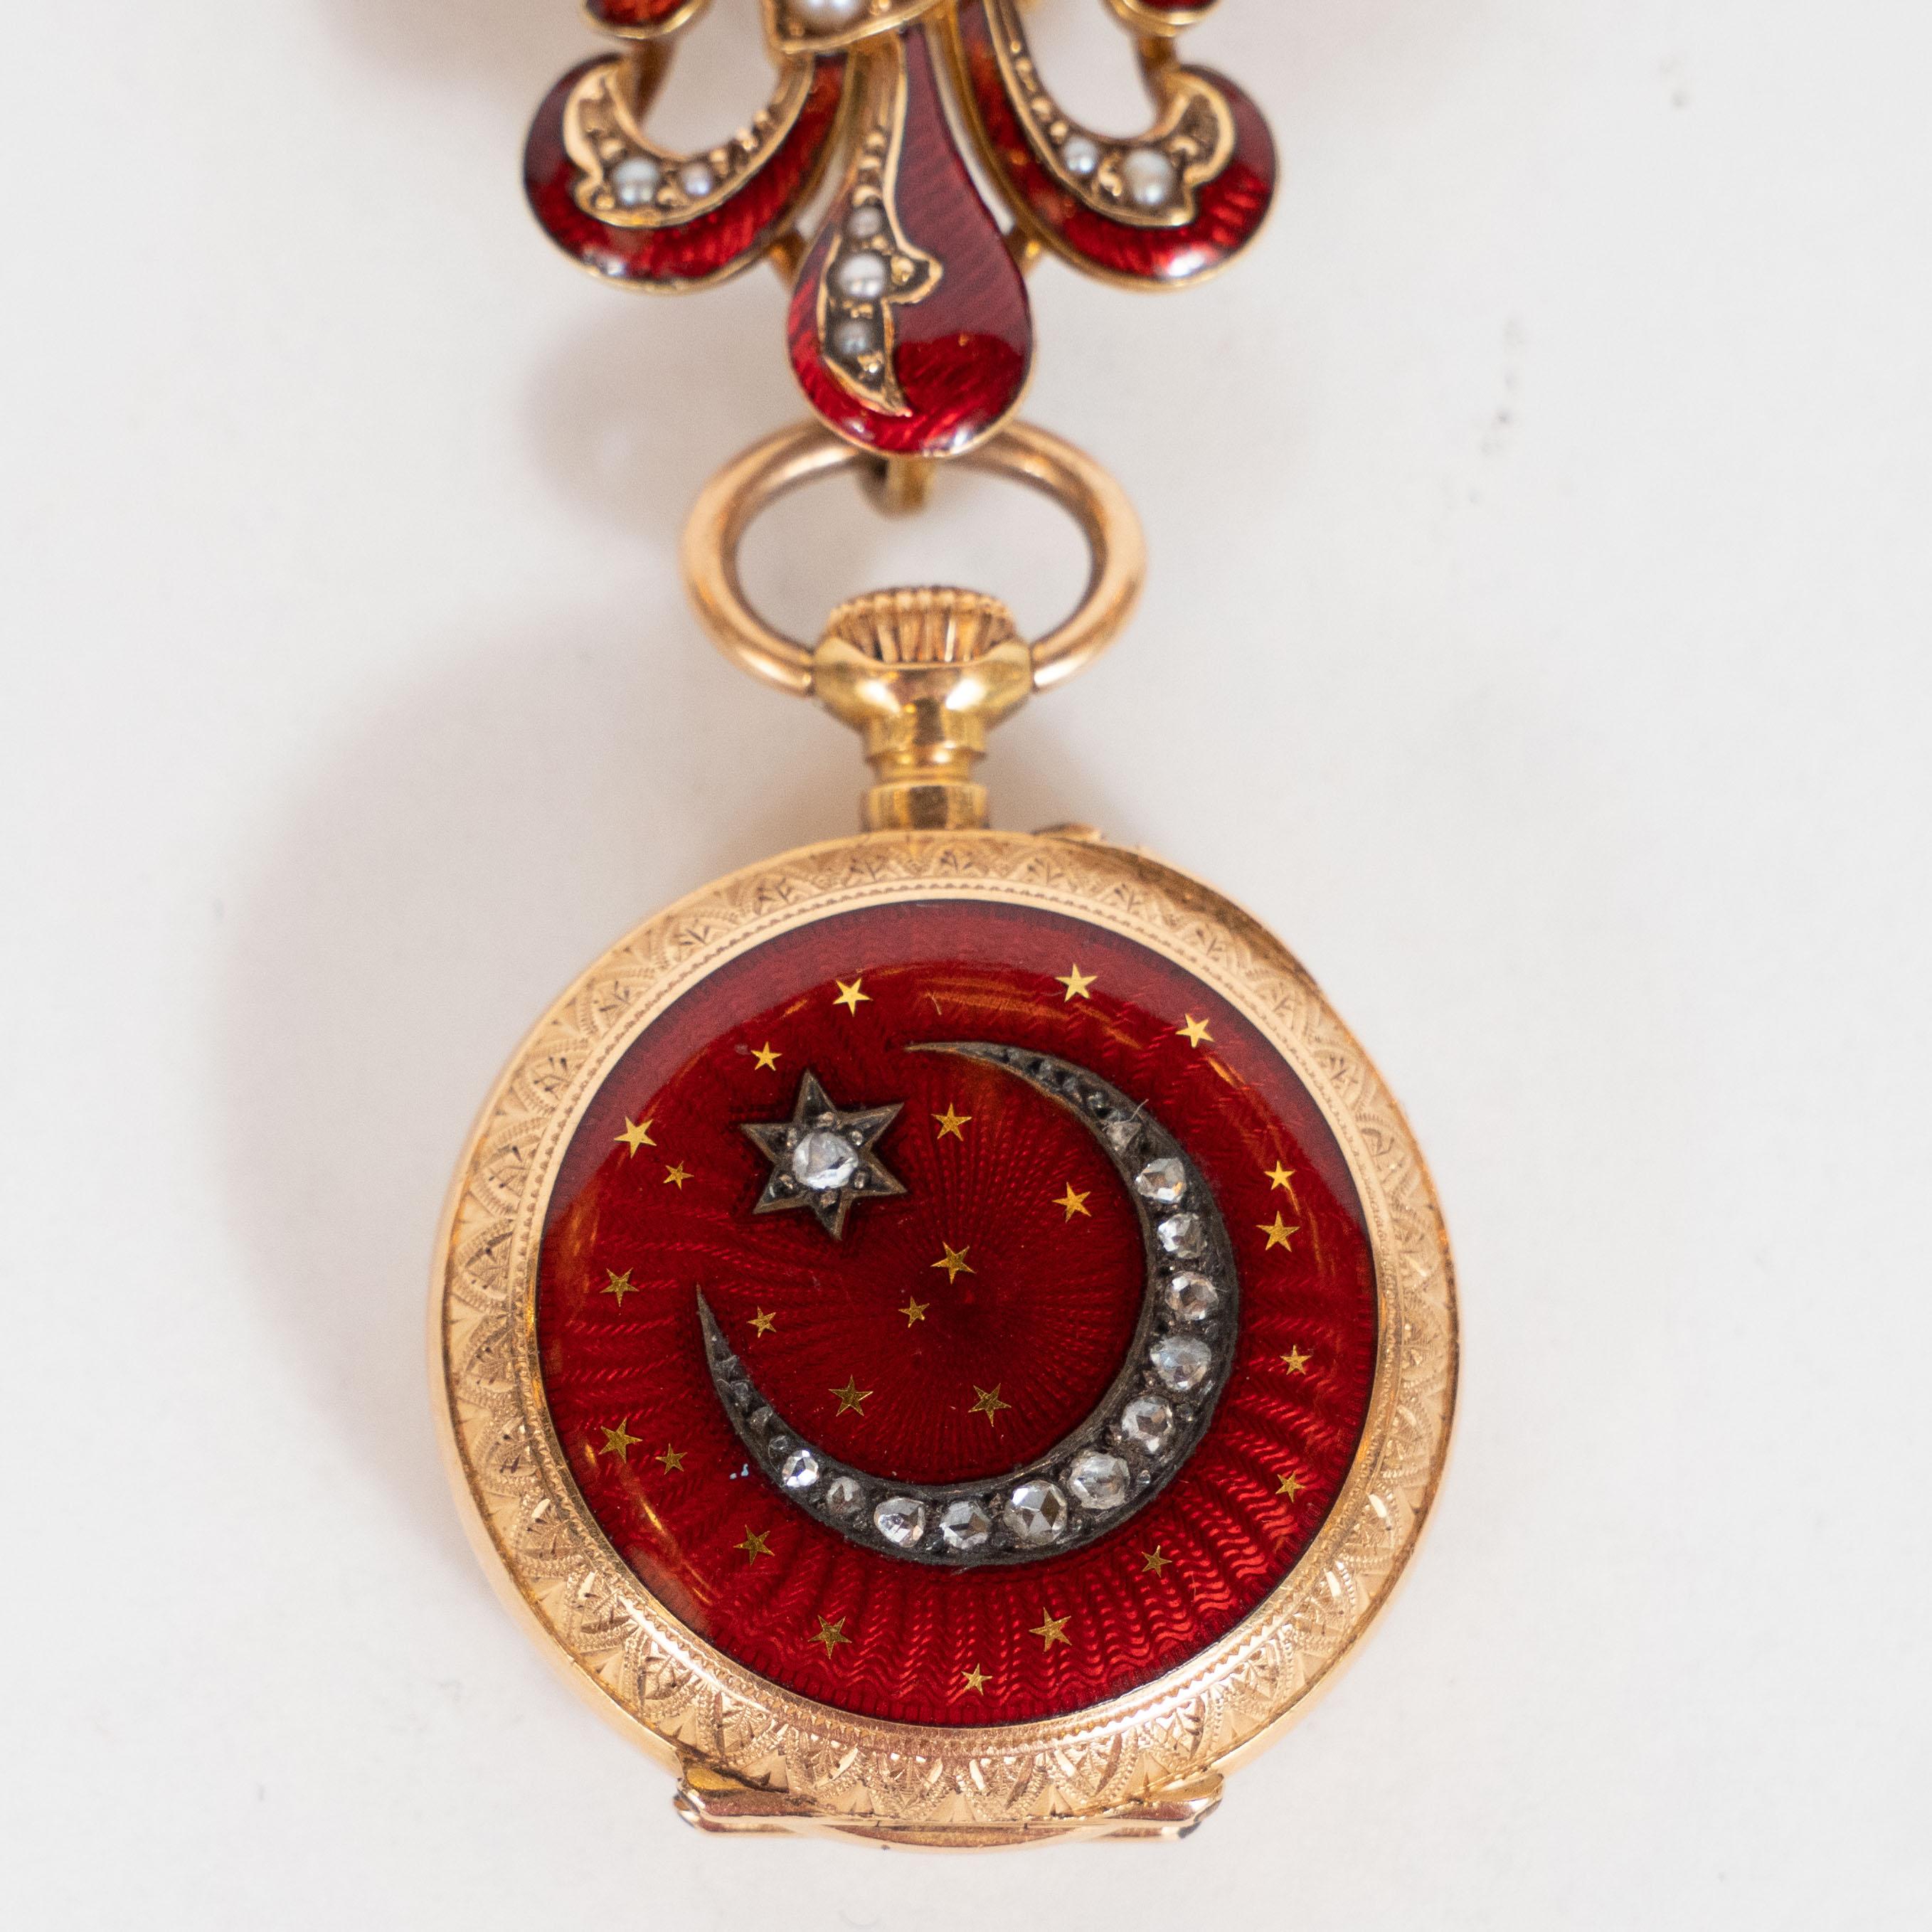 This elegant antique lapel was realized in France, circa 1860. It features a circular pendant composed of 18kt yellow gold with crescent moon and star inlaid in starburst guilloche ruby enamel with rose cut diamonds. The watch pendant, inscribed on